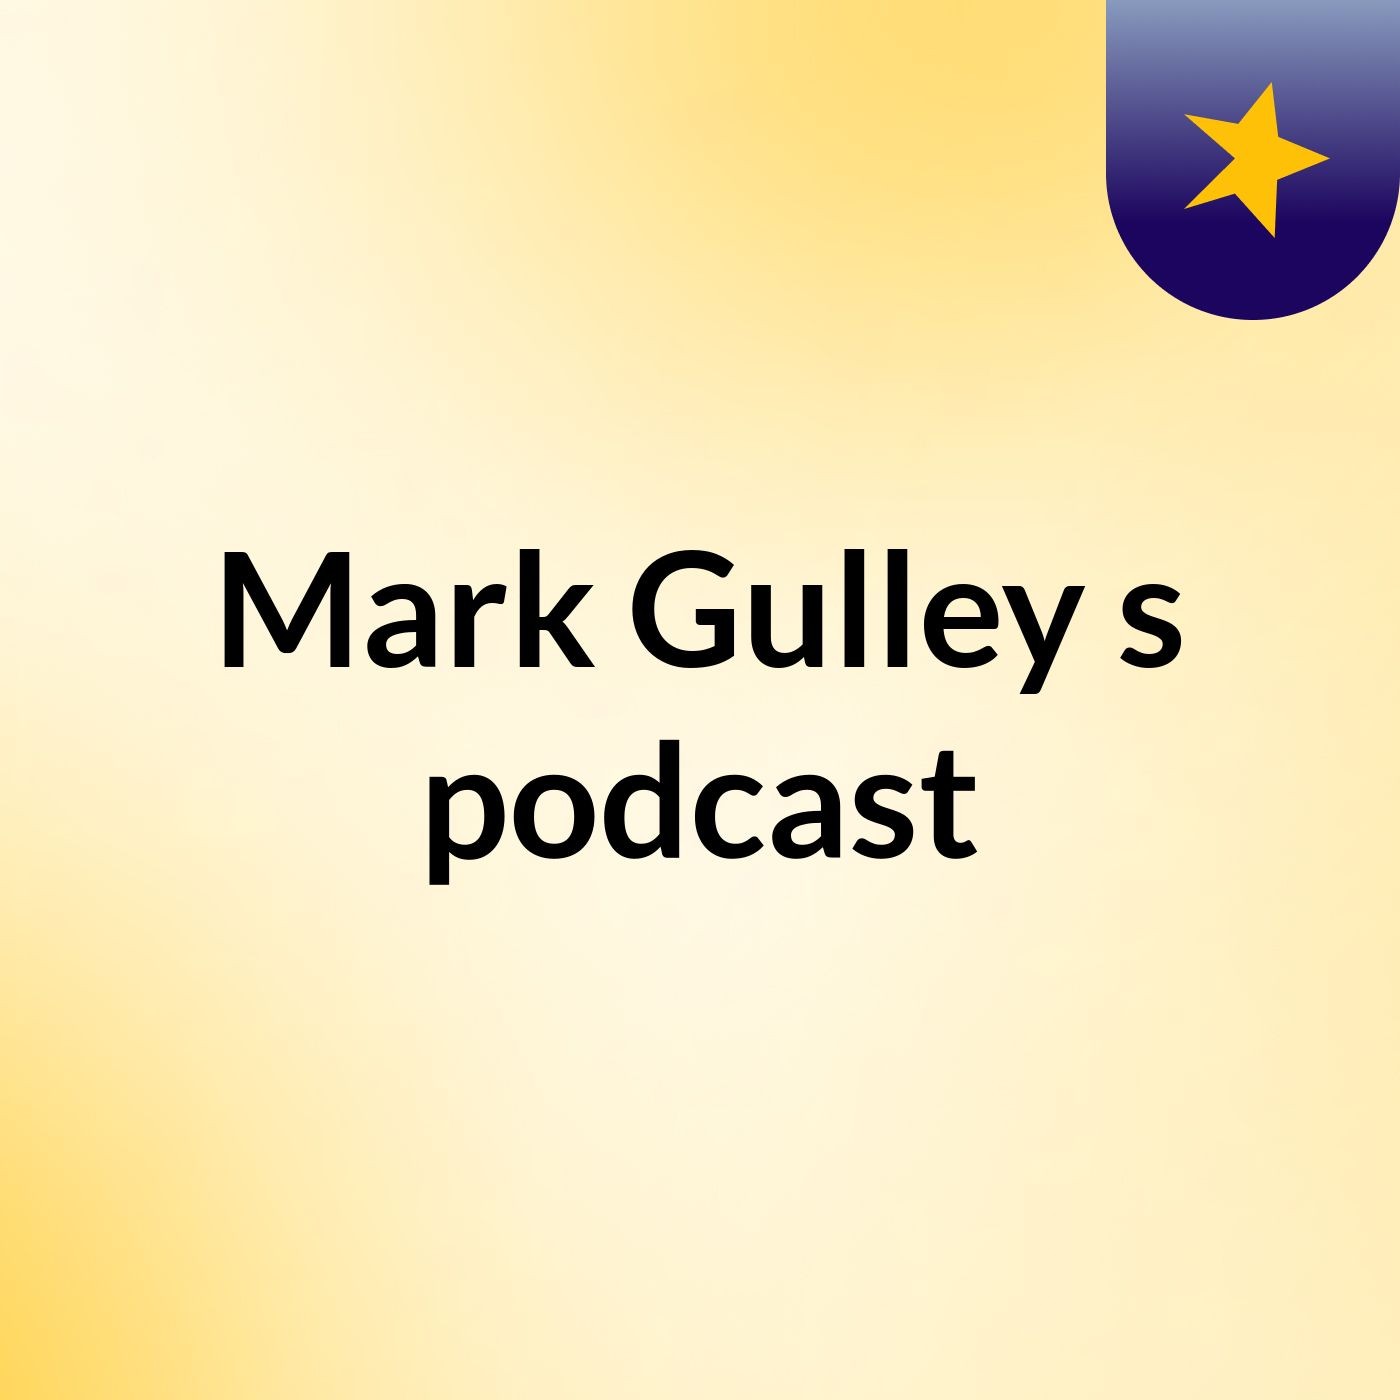 Mark Gulley's podcast